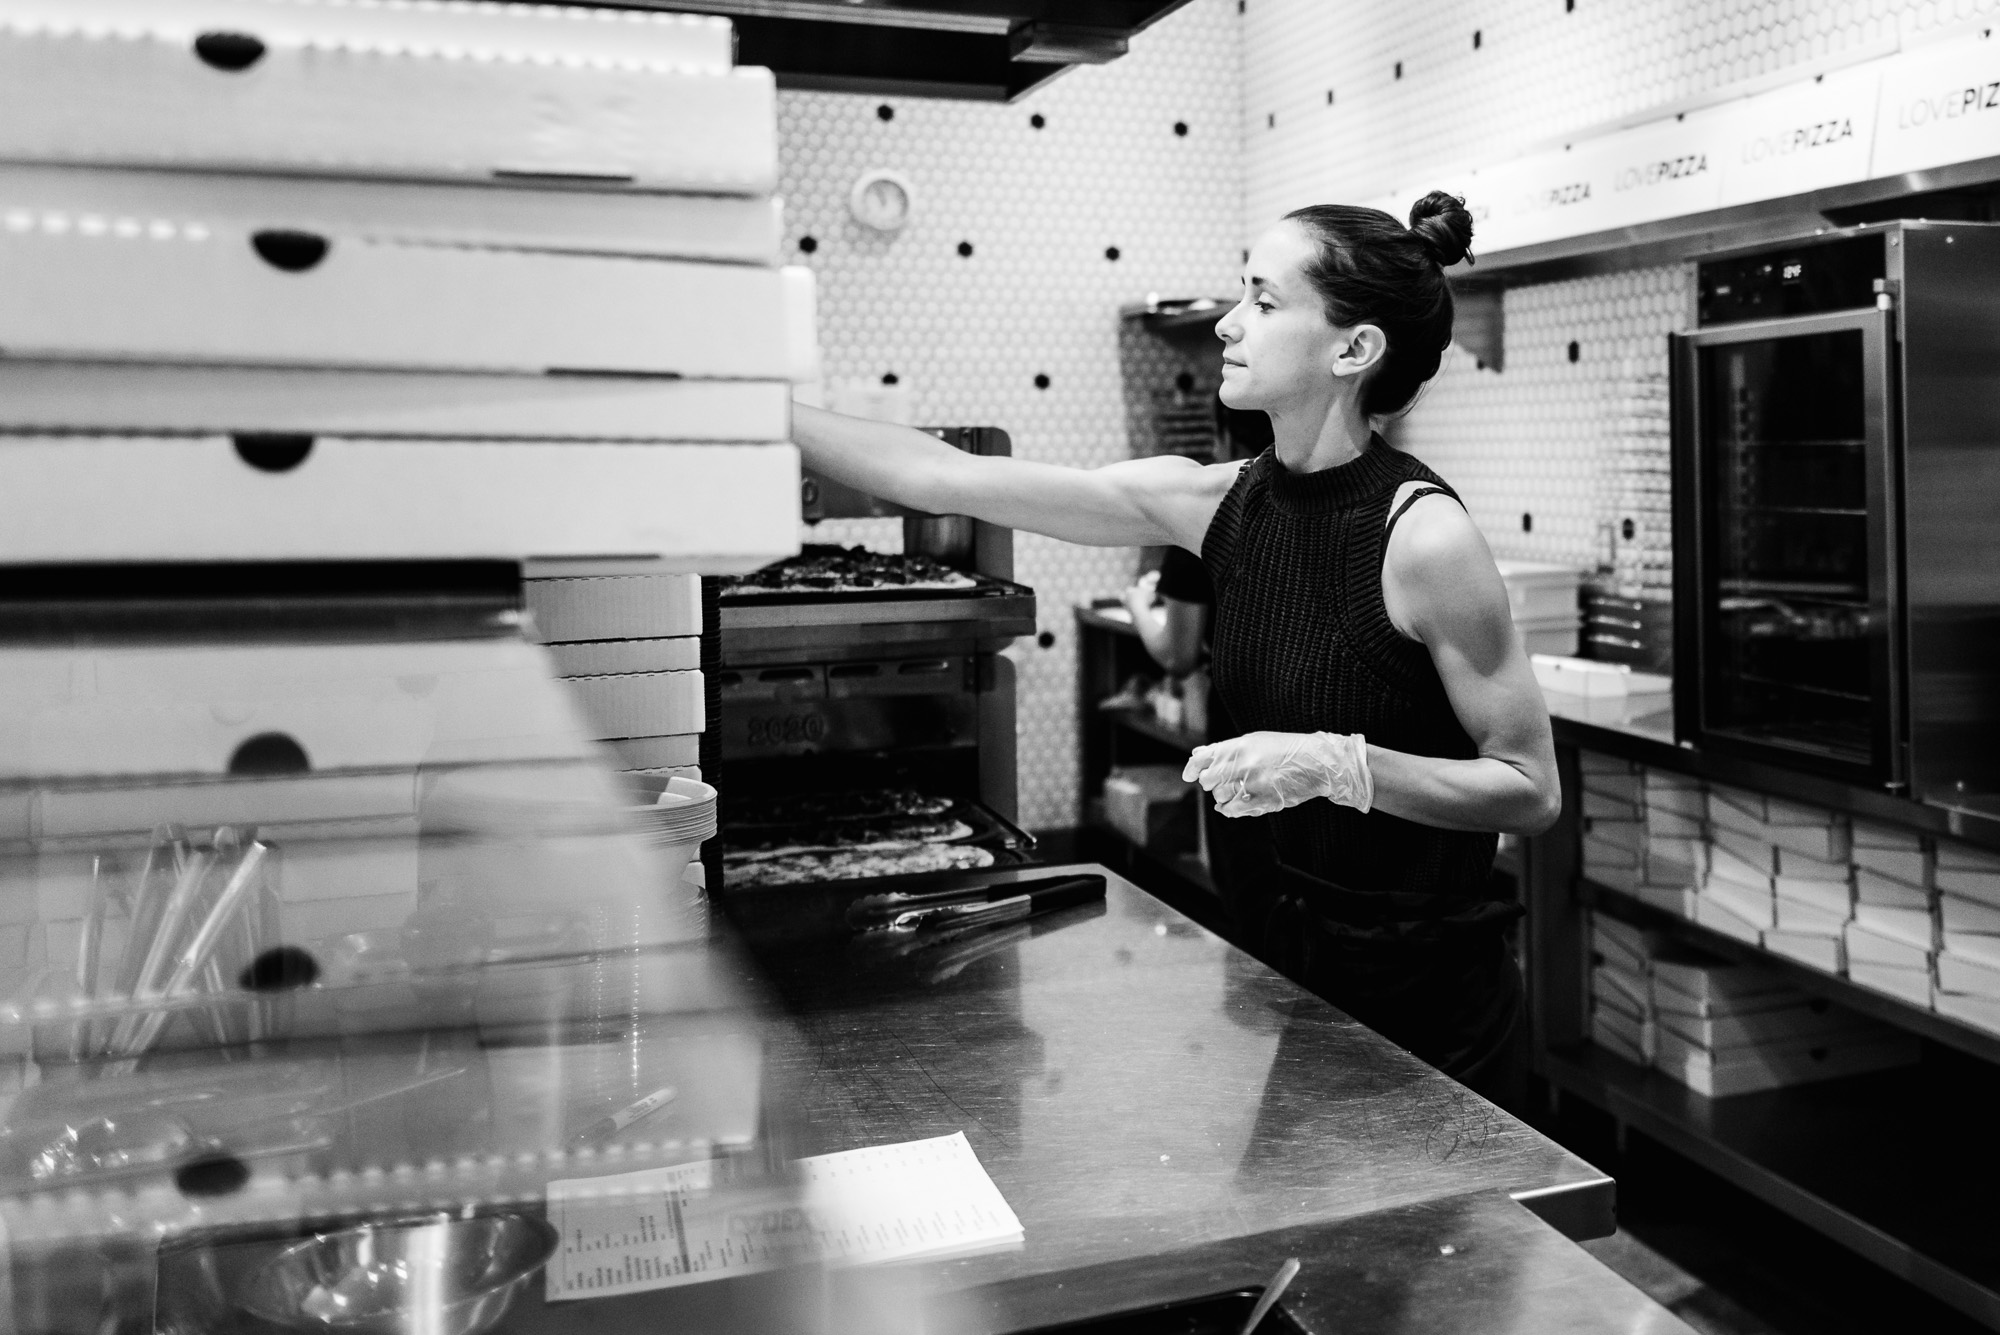 Love Pizza's owner Braede Harris works on the line making pizza